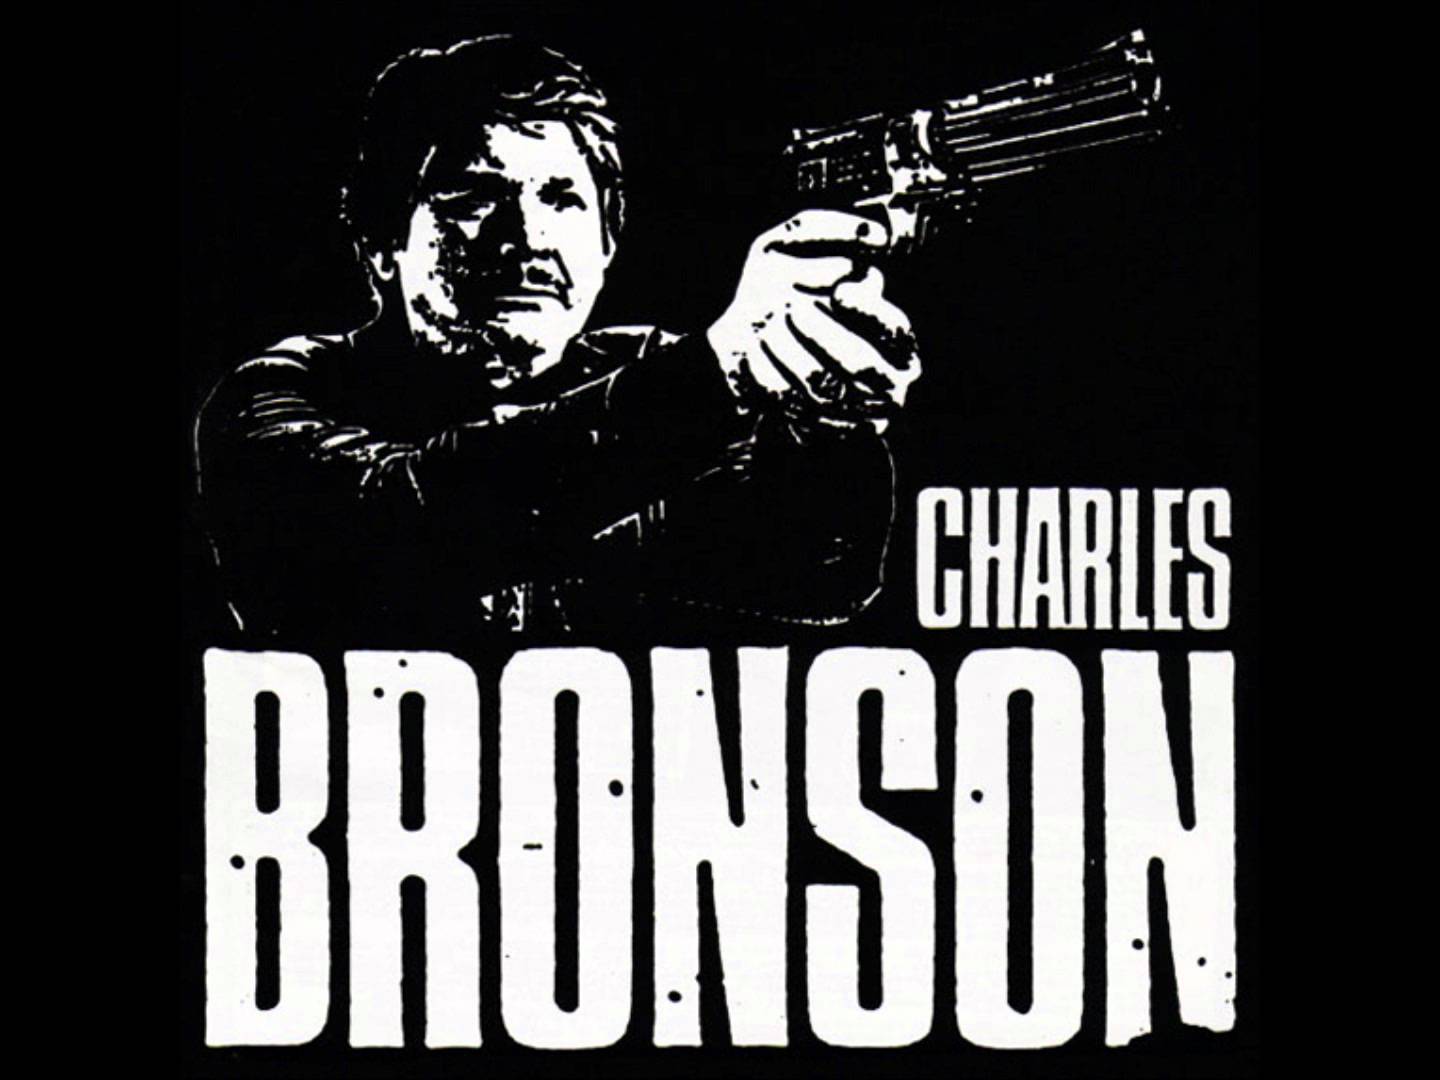 Charles Bronson - complete discocrappy disc 1